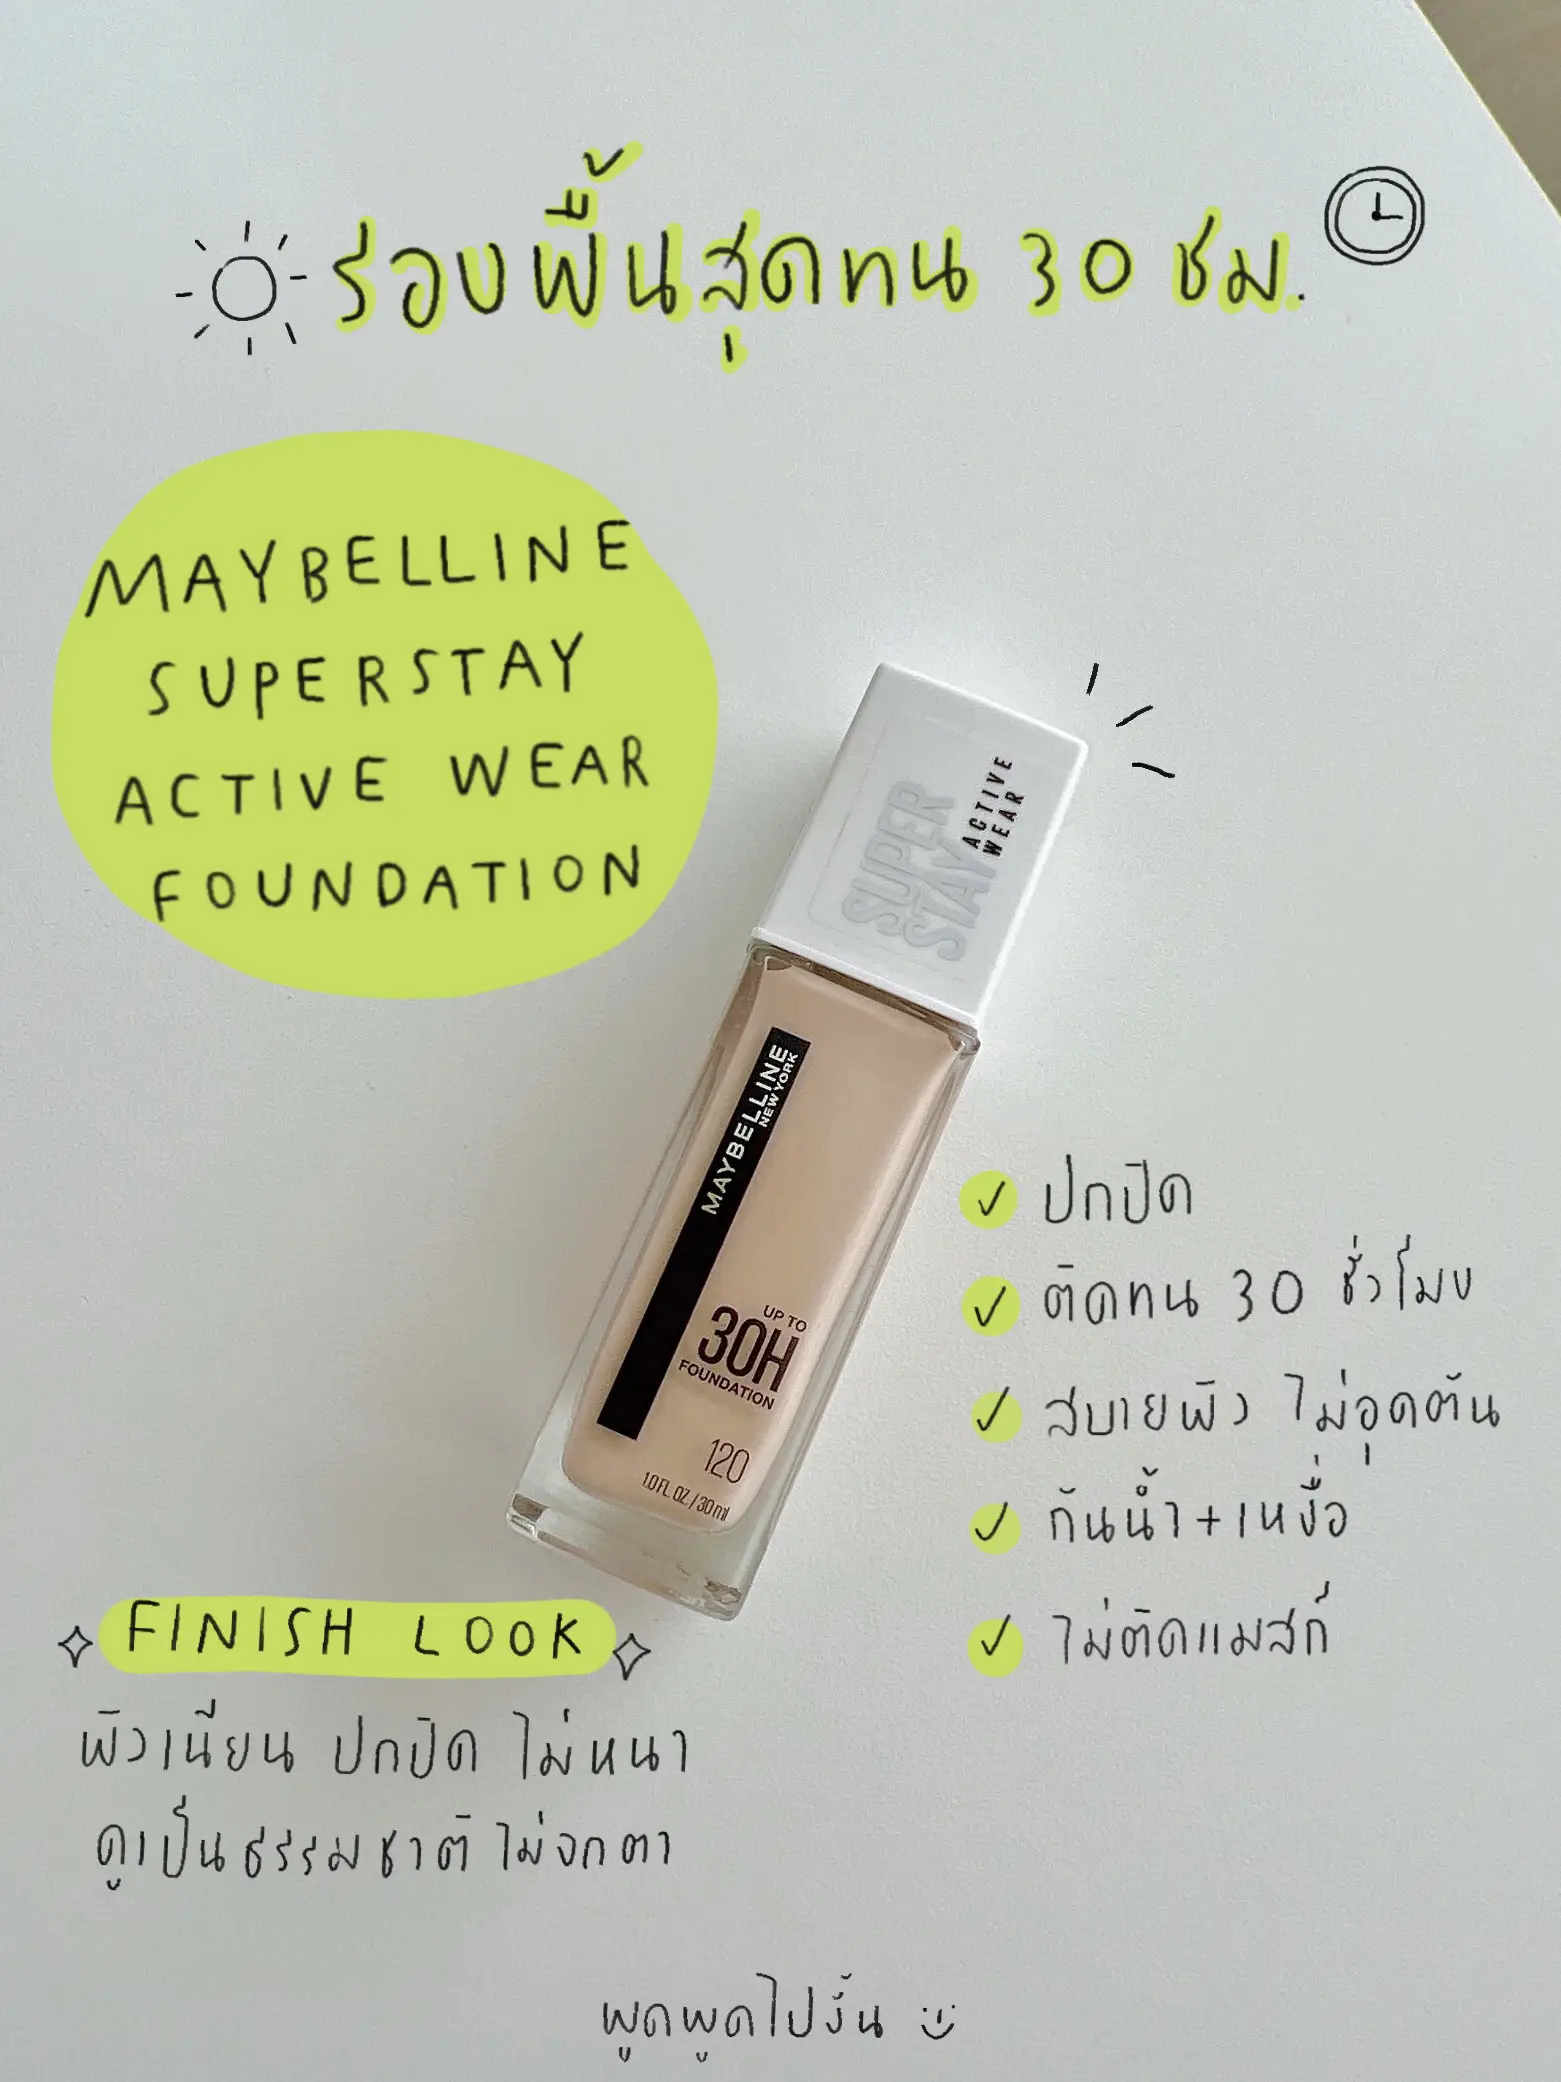 Maybelline New Foundation. Last up to 30 hours. | Gallery posted by  ployhomx | Lemon8